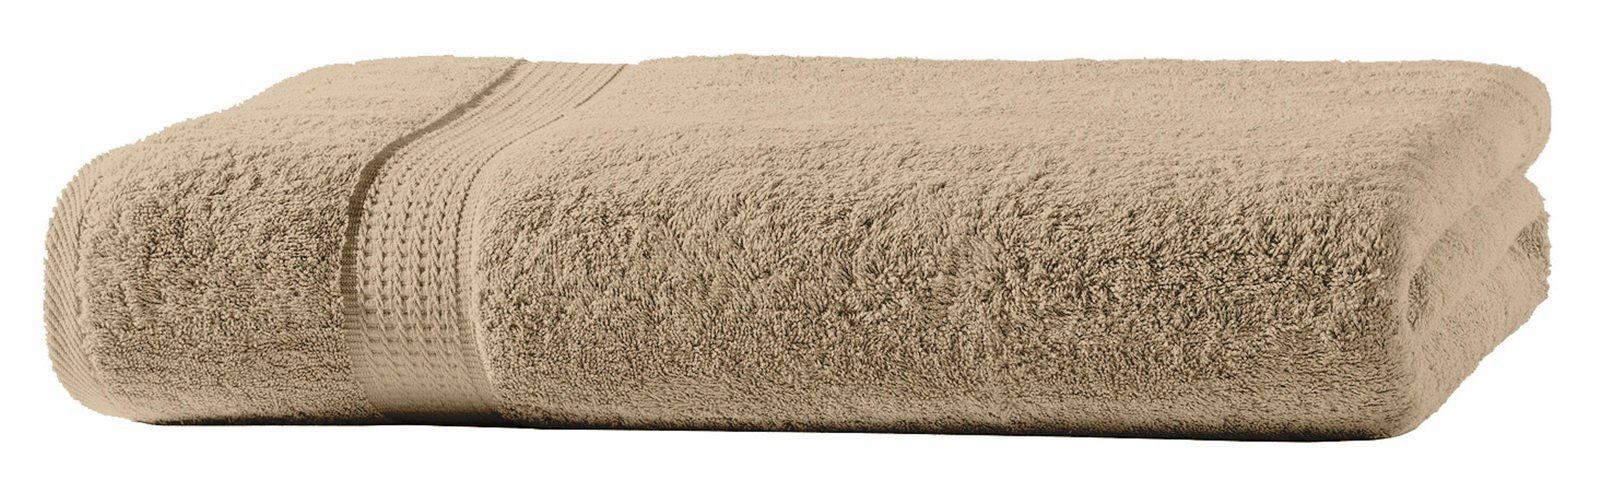 One Home Duschtuch Royal, Frottee (1-St), mit Bordüre, saugfähig beige